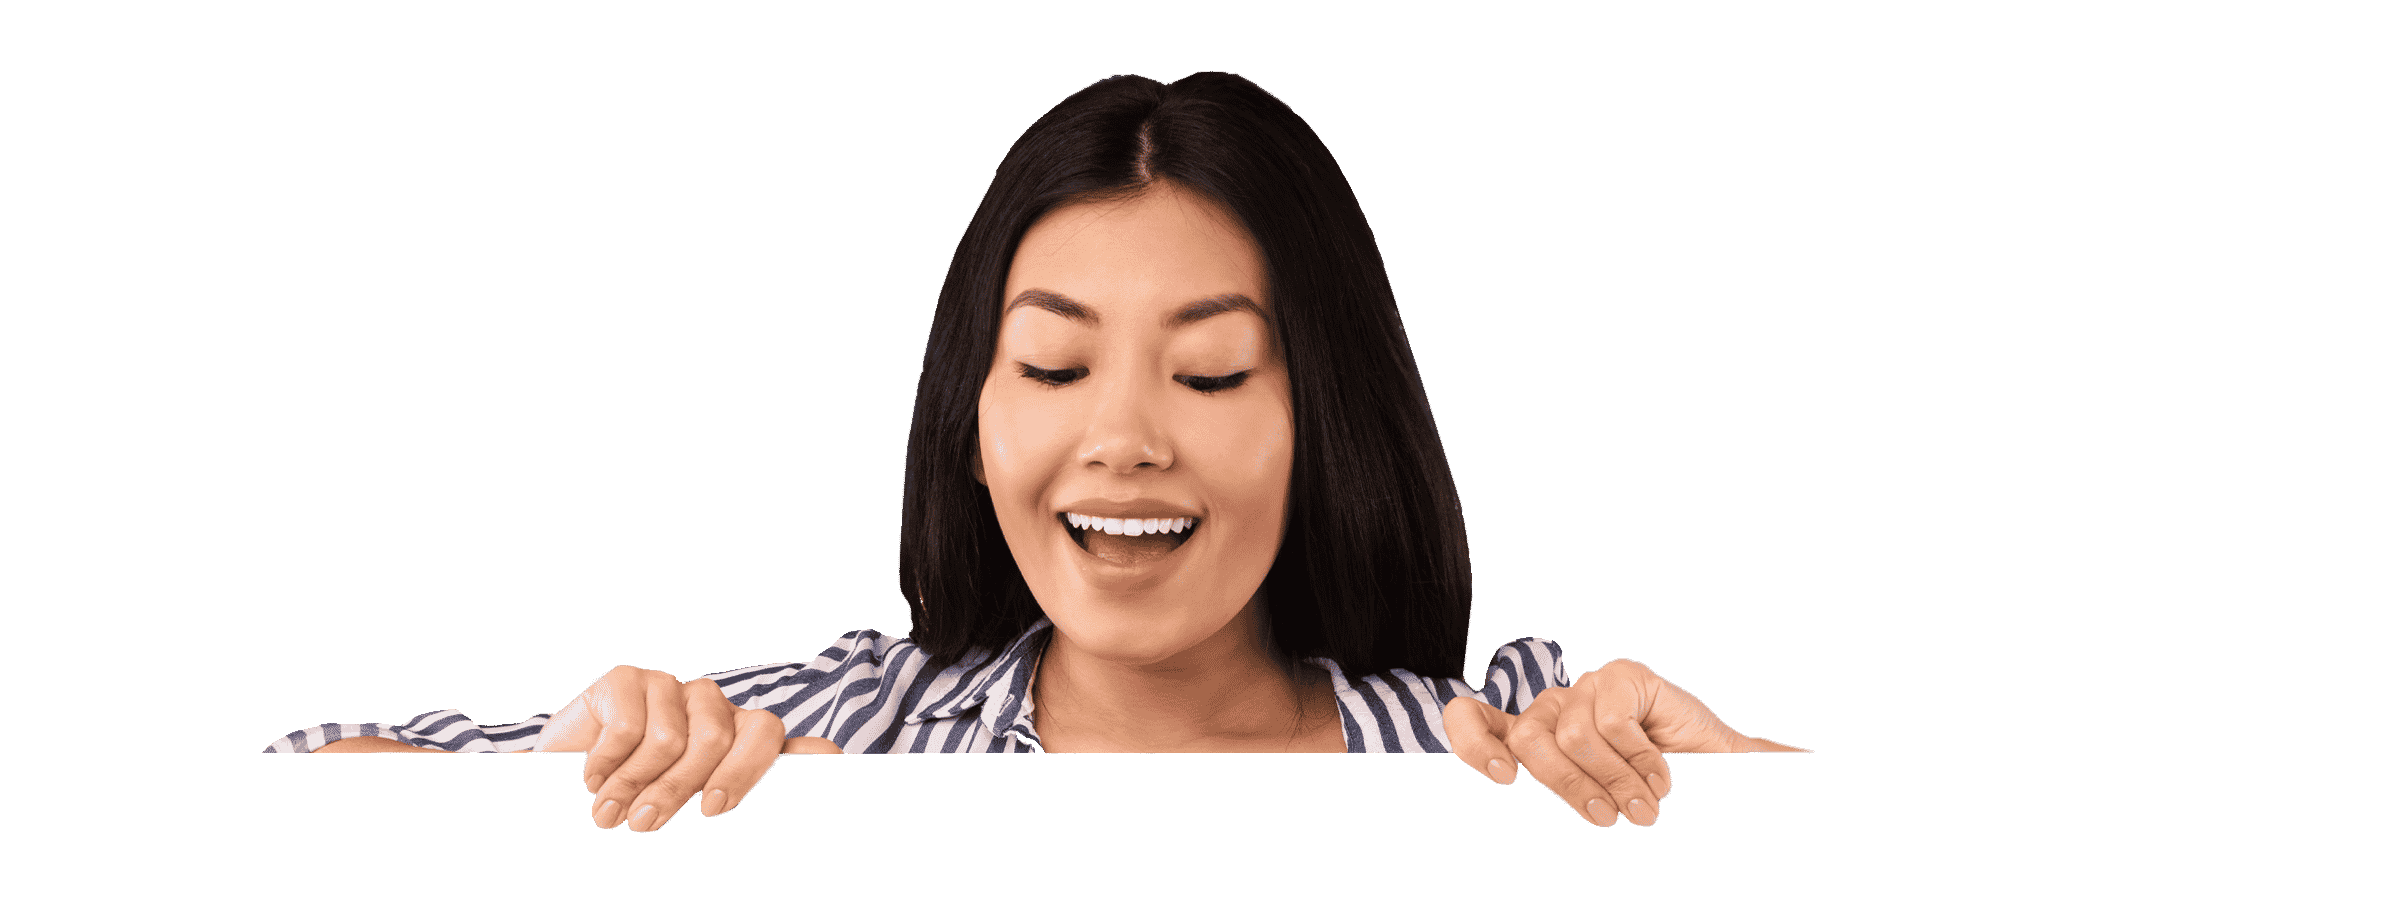 asian woman anxiety free after taking cbd